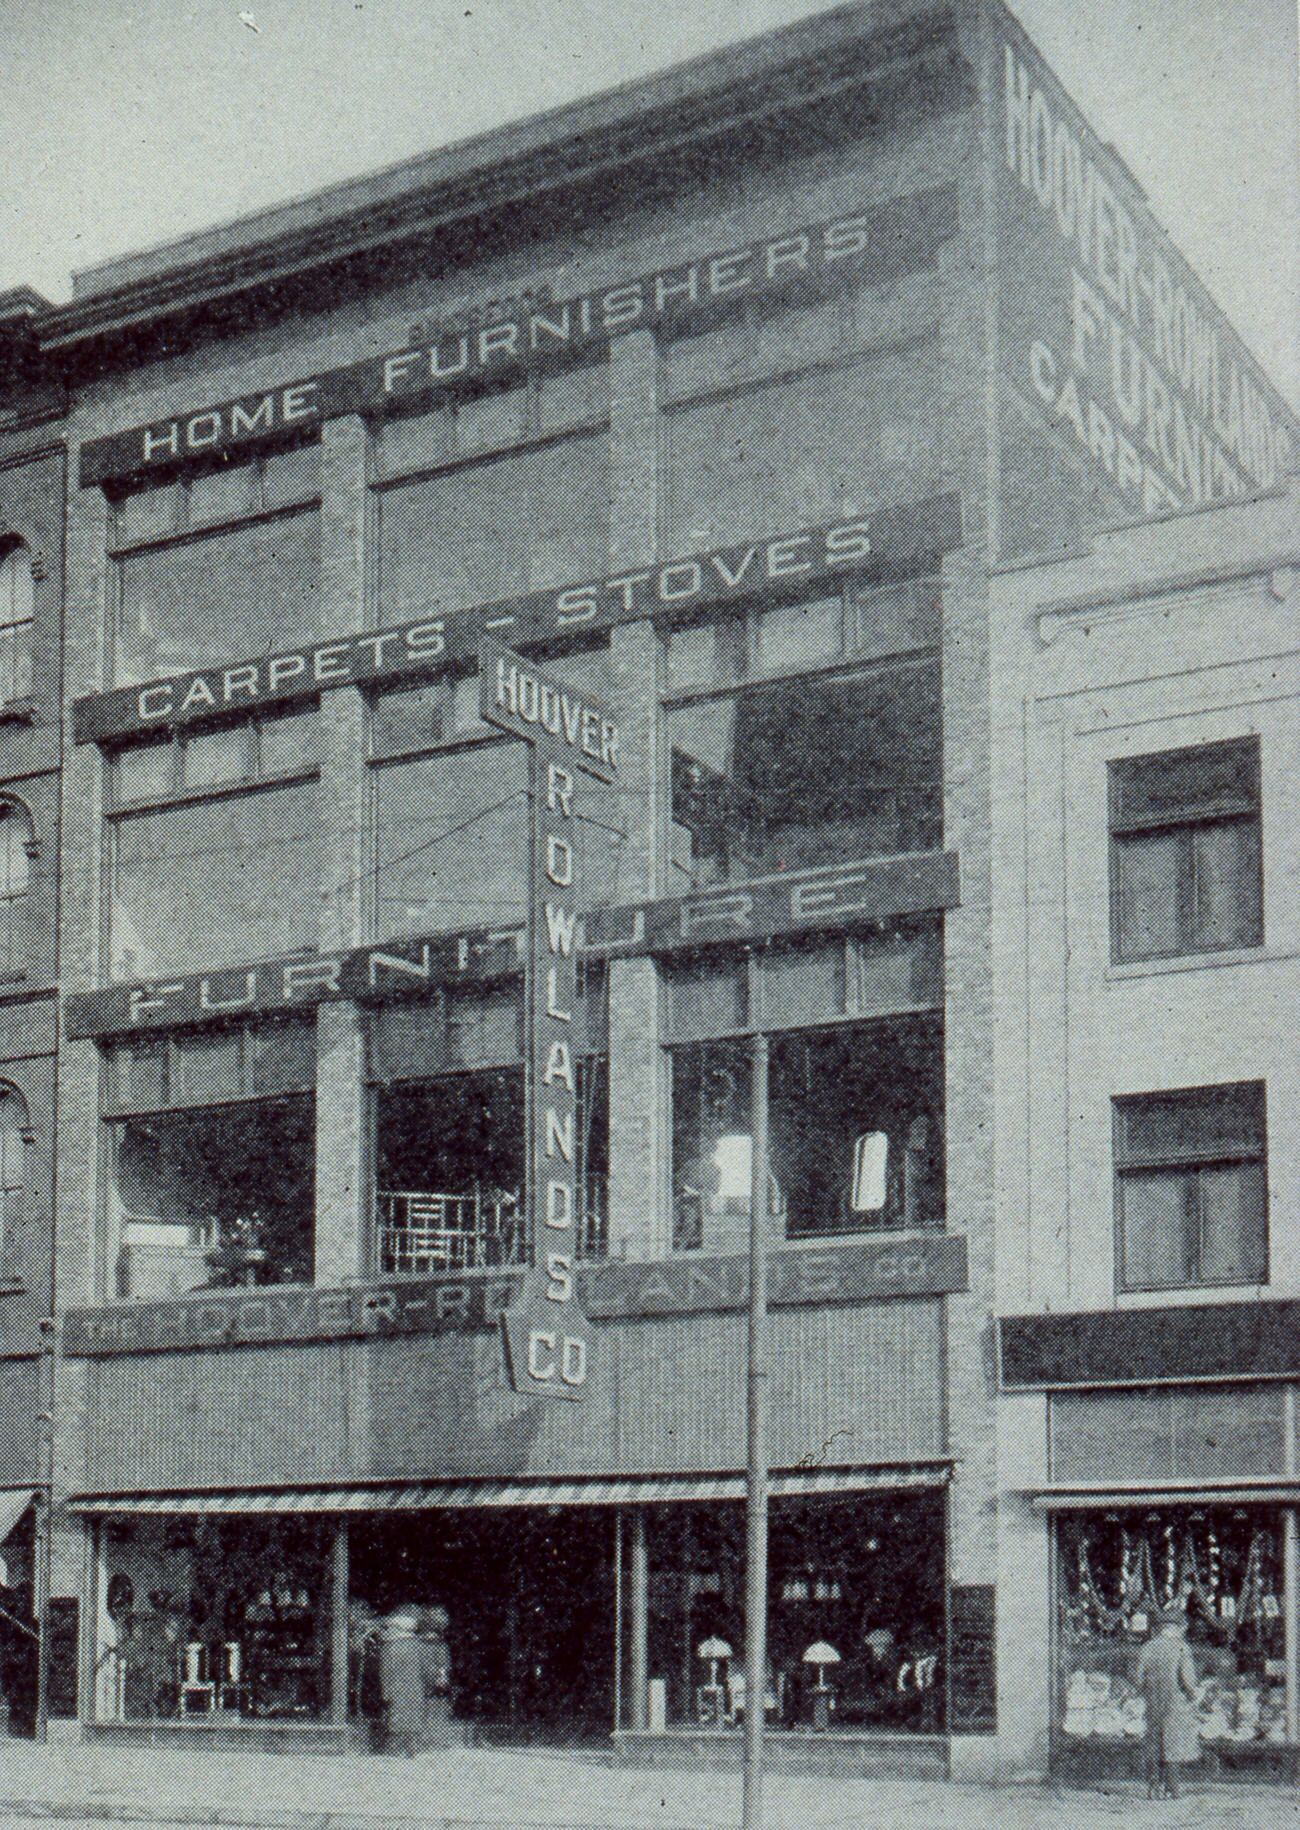 Hoover Rowlands Furniture Company building, 1915.